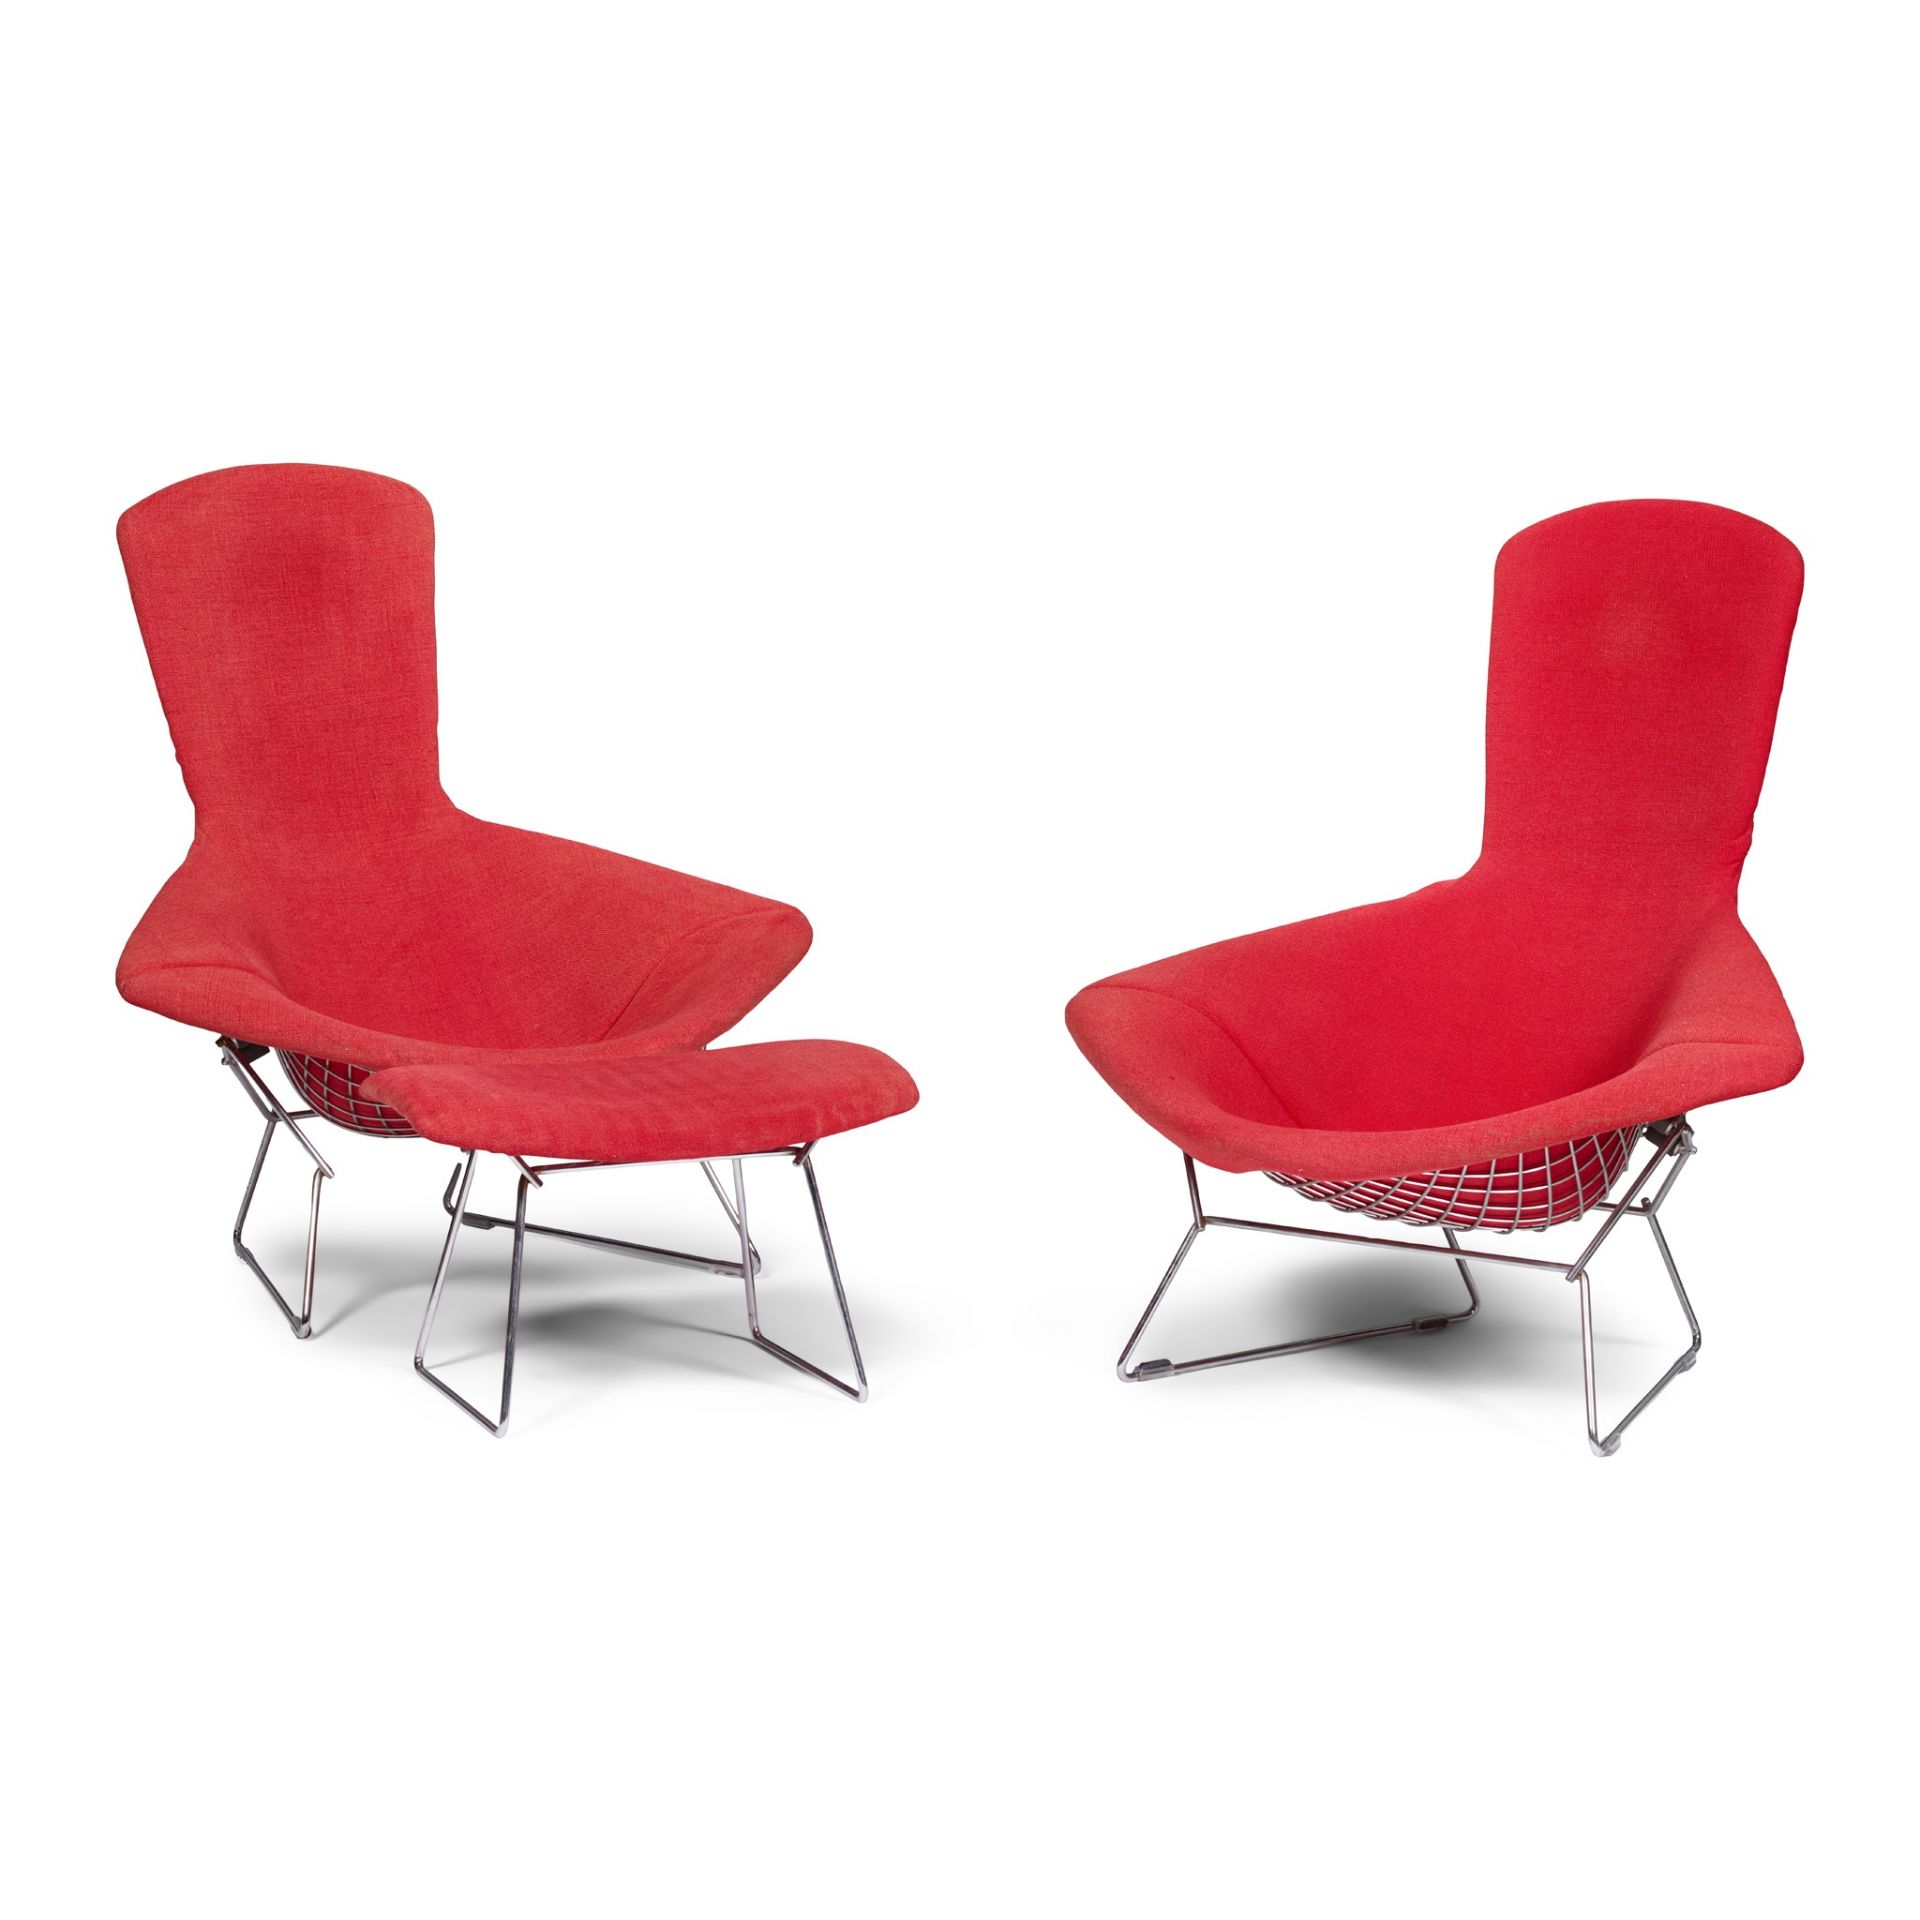 § HARRY BERTOIA (1915-1978) FOR KNOLL ASSOCIATES PAIR OF ‘BIRD’ ARMCHAIRS, DESIGNED 1952 - Image 2 of 2